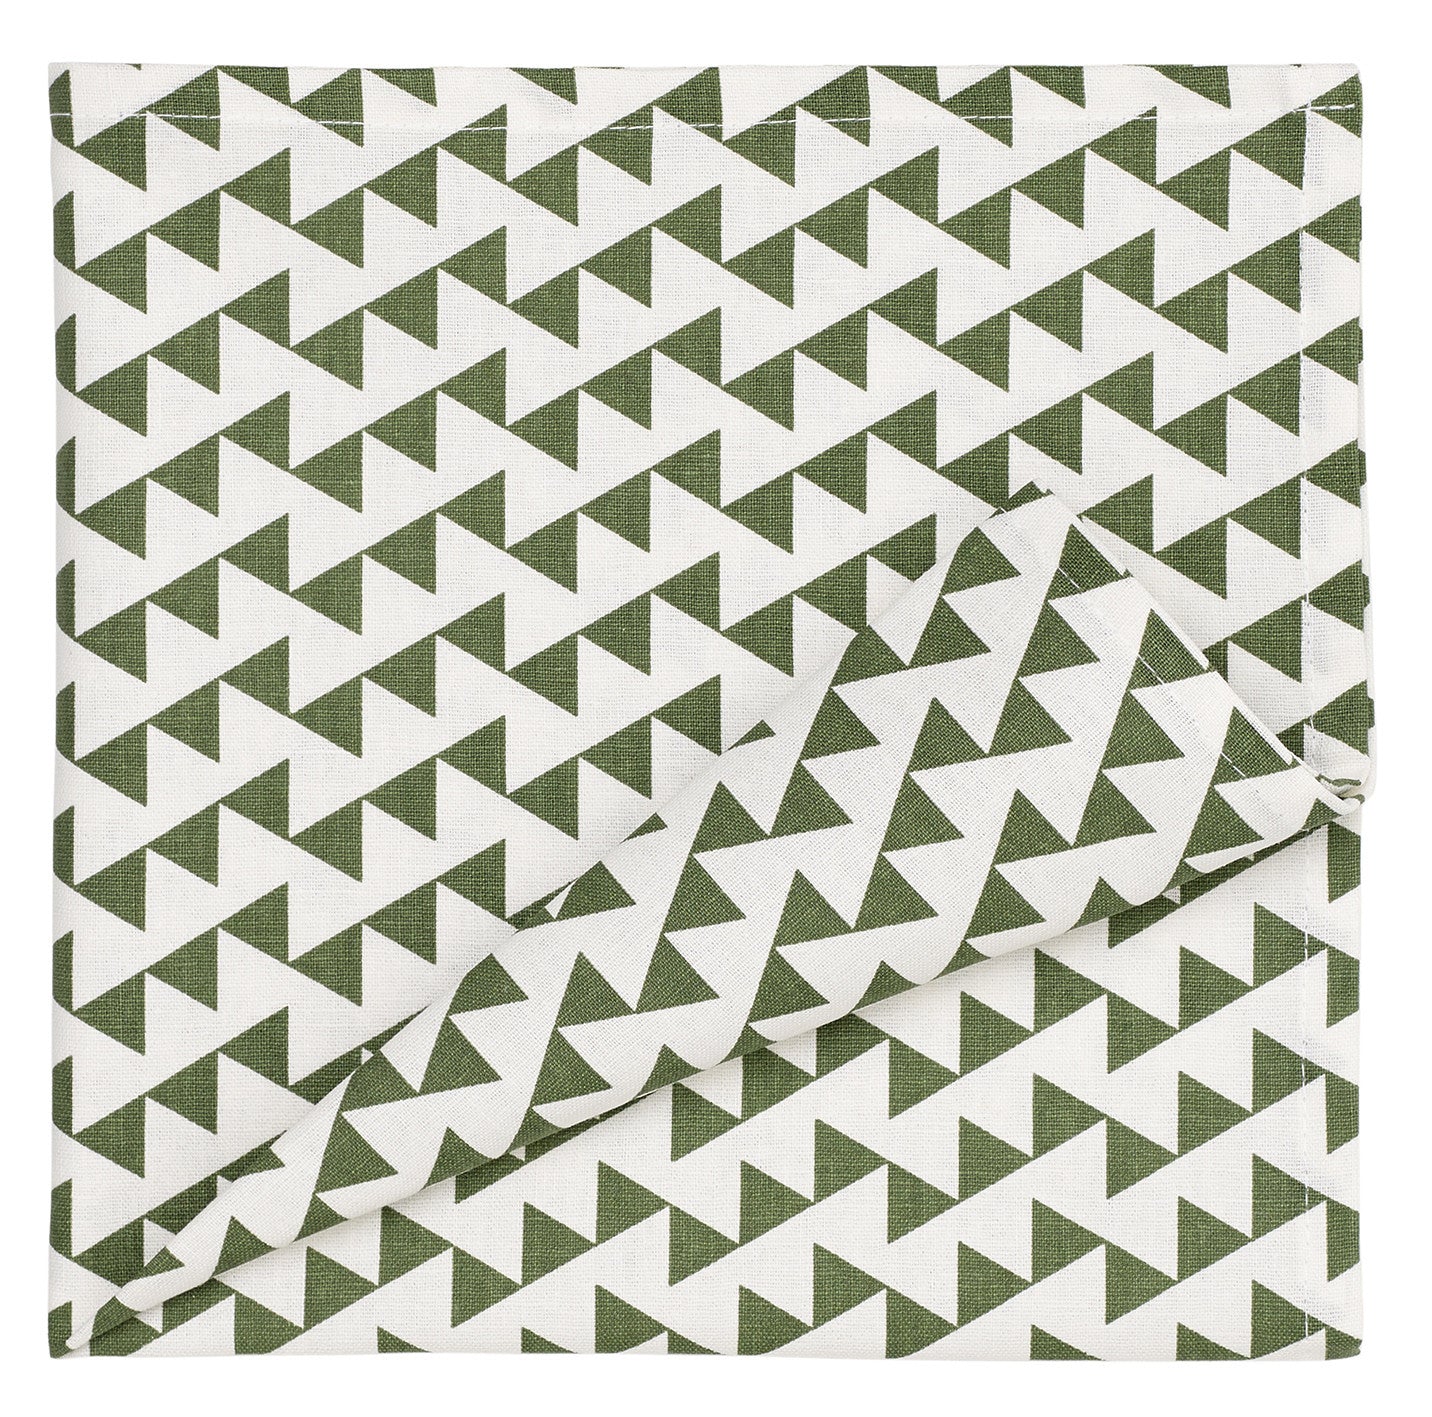 Bunting Geometric Pattern Linen Cotton Napkins in Olive Green